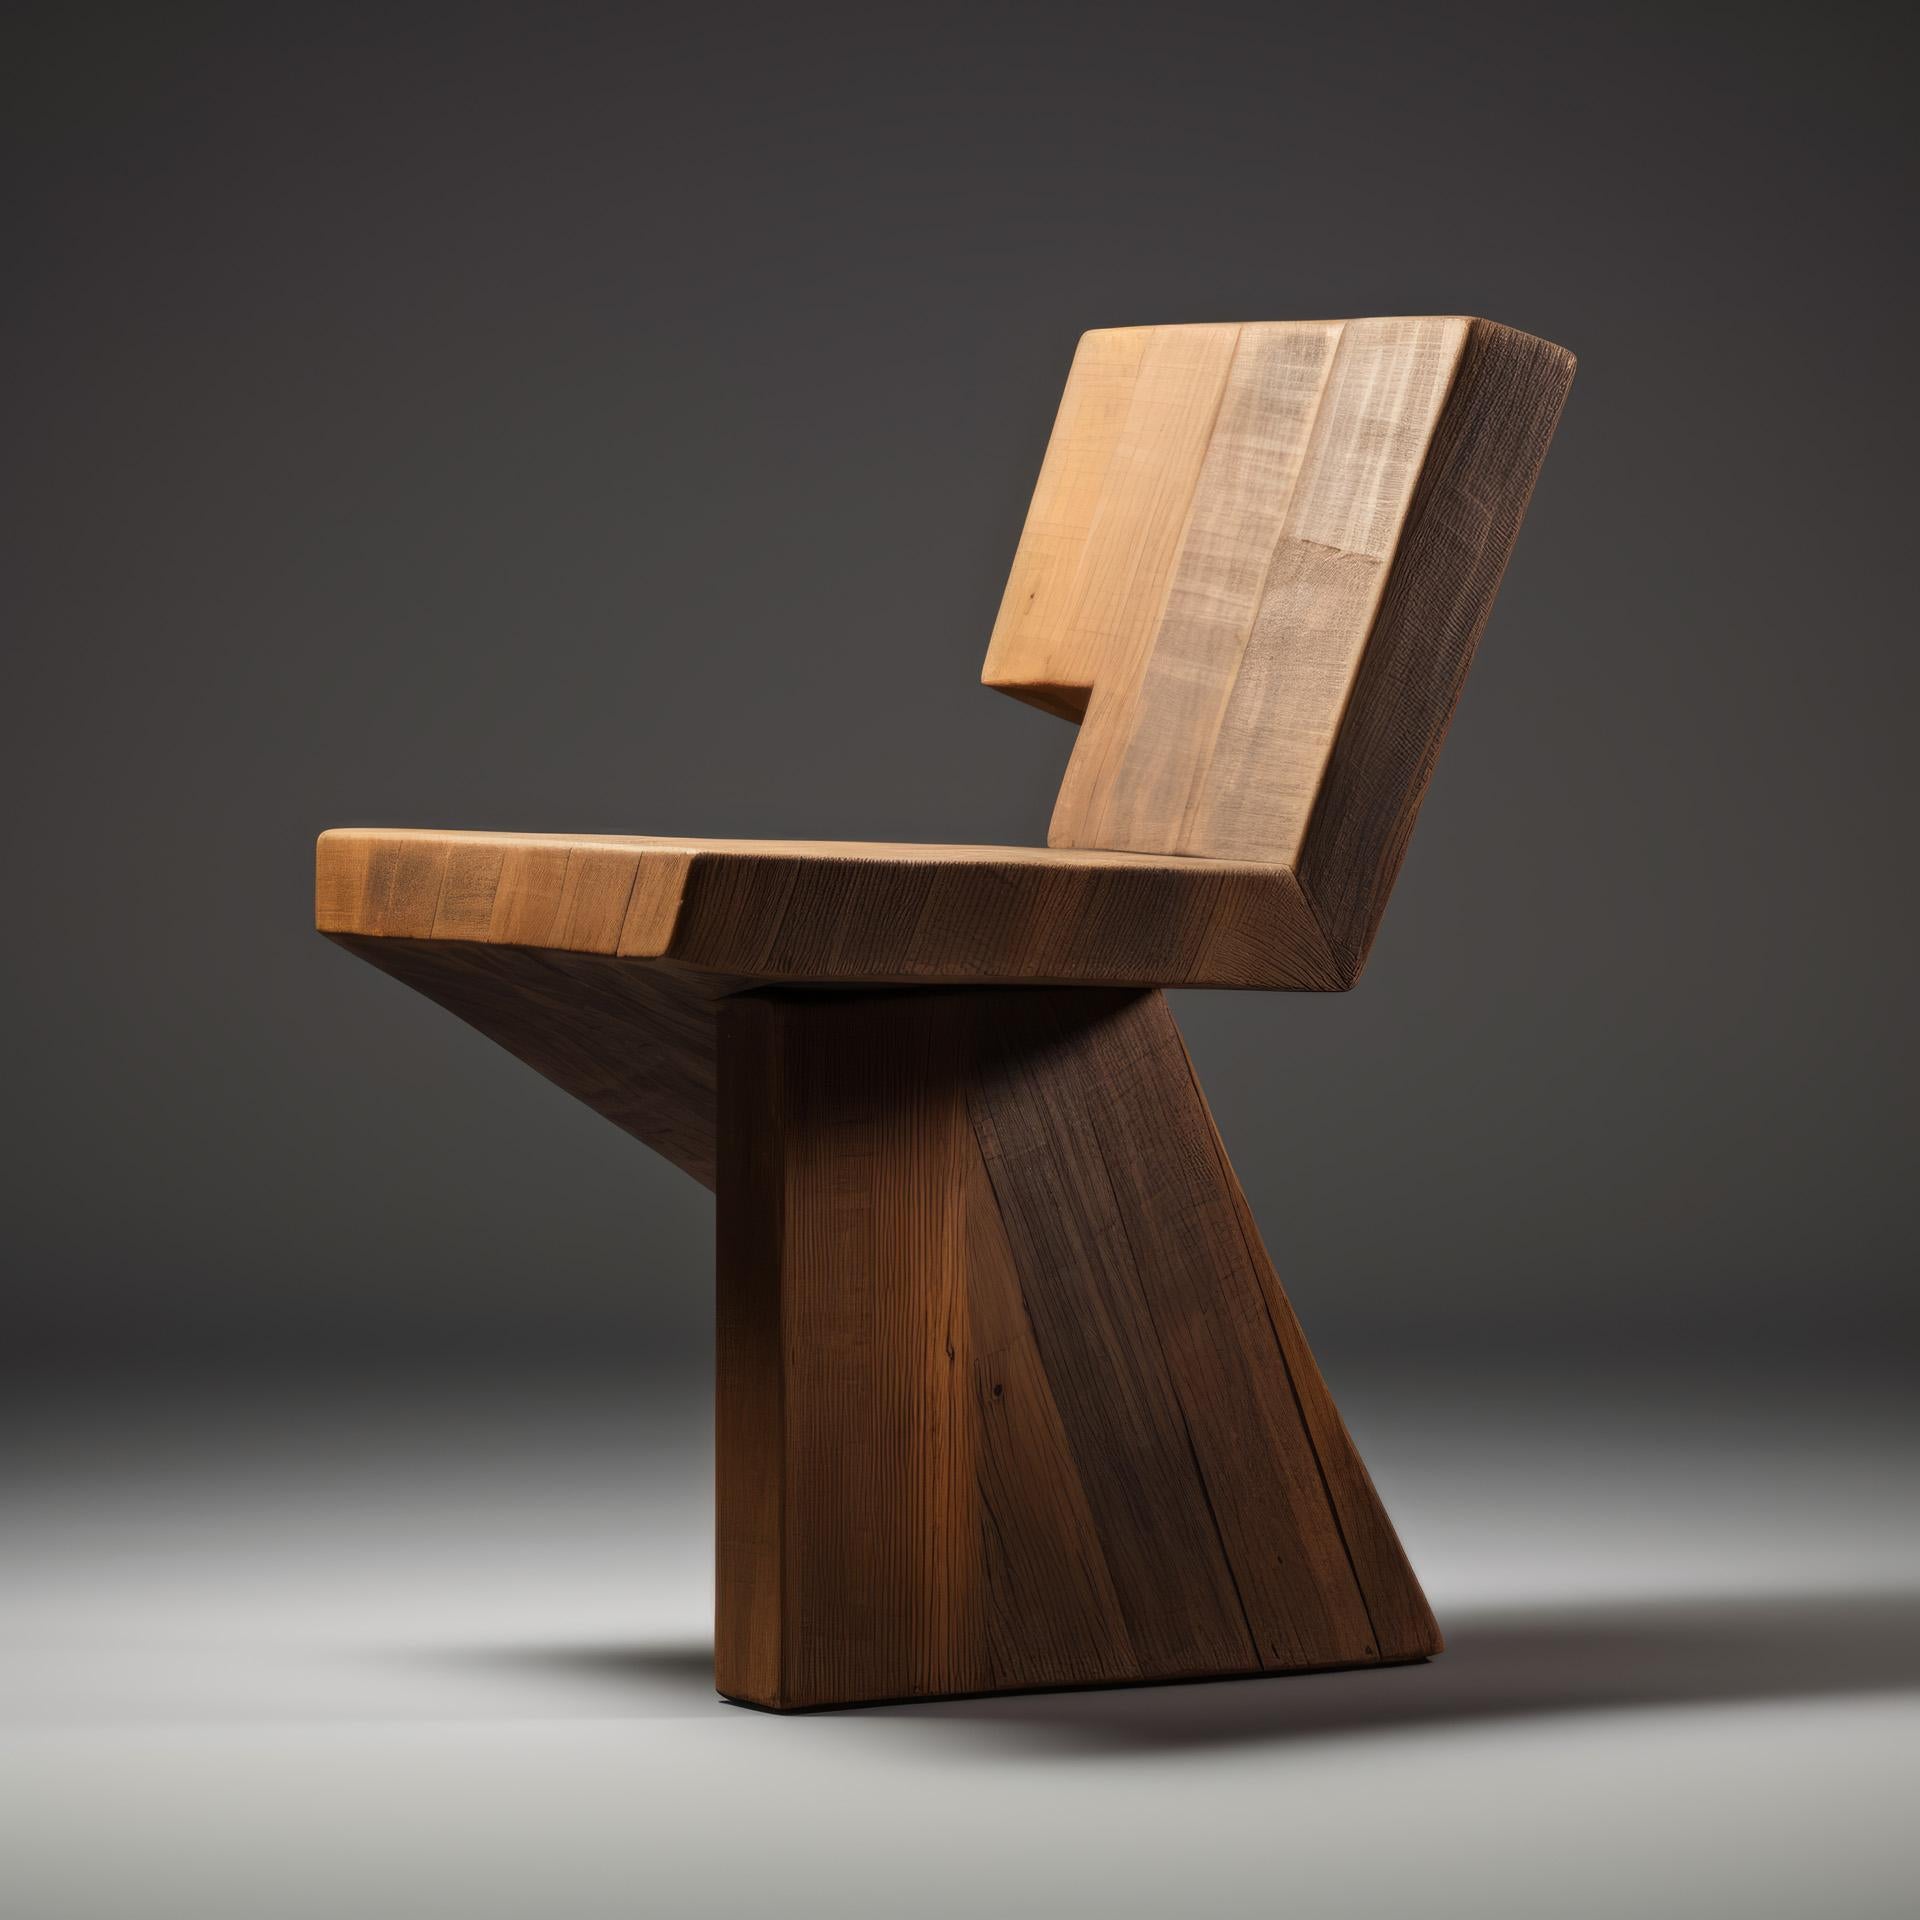 Wen Chair by objective OBJECT Studio
Dimensions: D 45.5 x W 53.5 x H 78.5 cm 
Materials: Wood.


objective OBJECT
an embodiment of our architectural ethos.

We represent an unwavering dedication to truth, impartiality, and the profound understanding